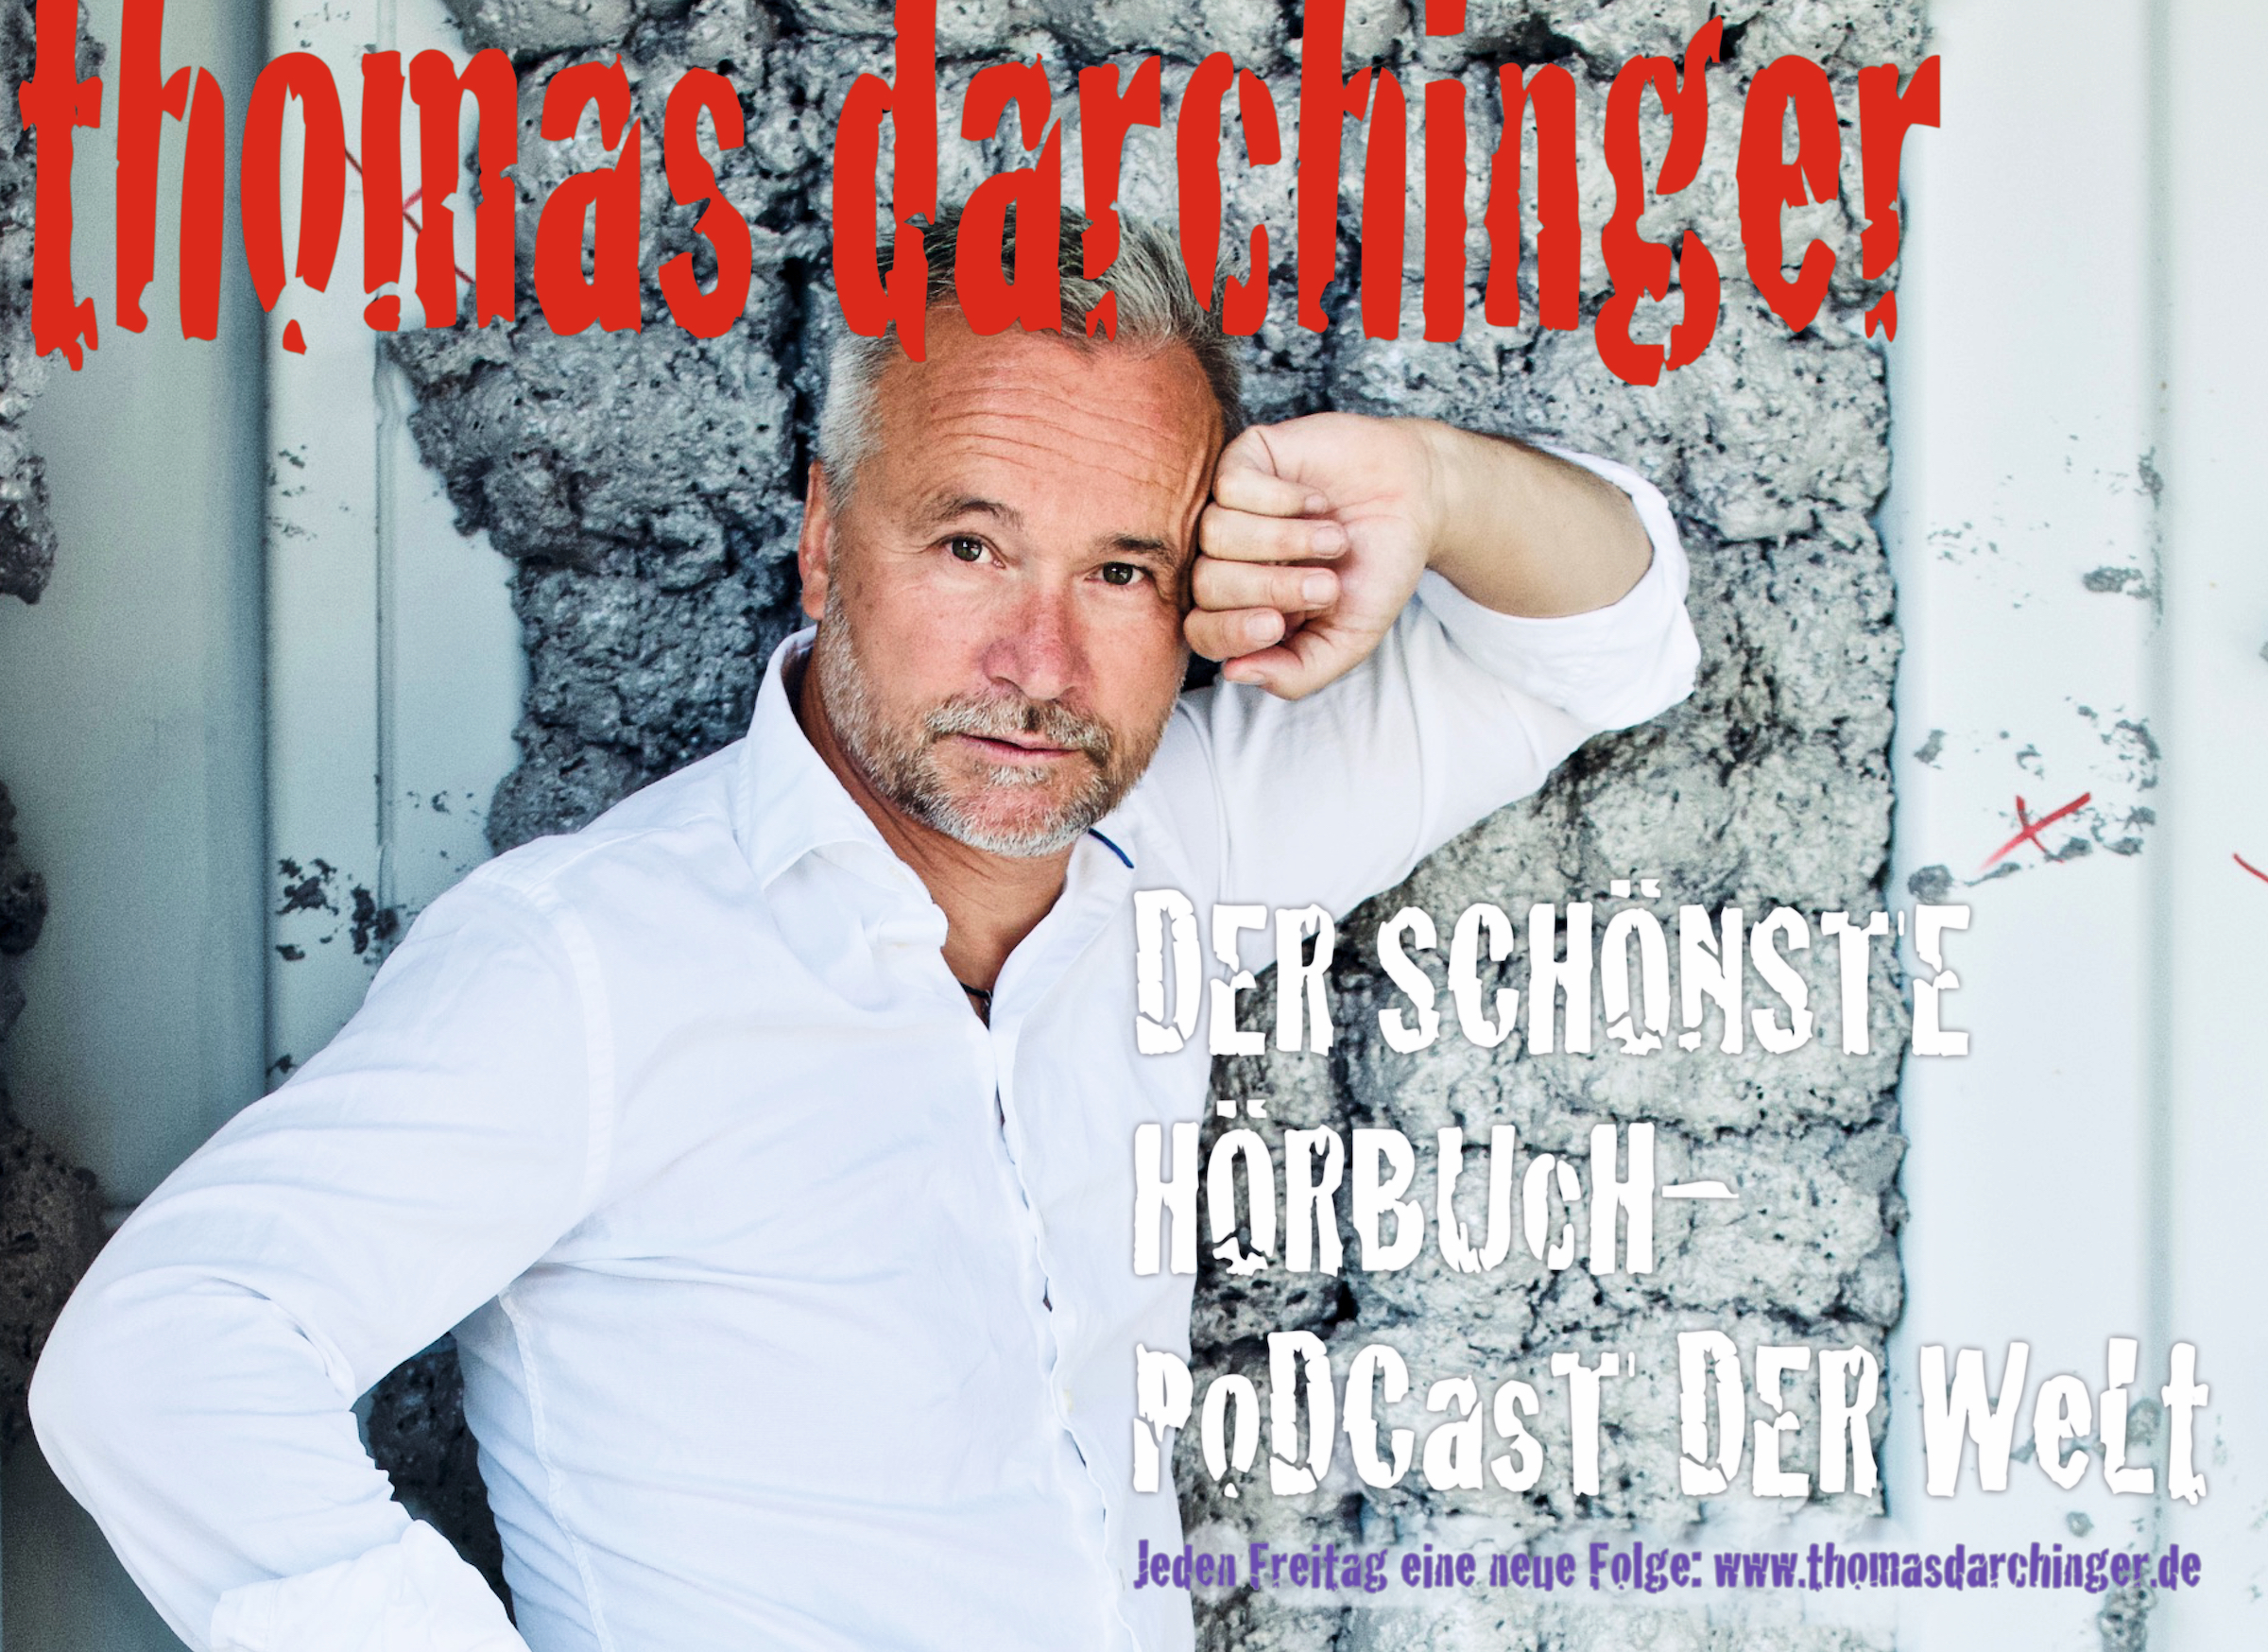 Thomas_Darchinger_Hoerbuch_Podcast_s